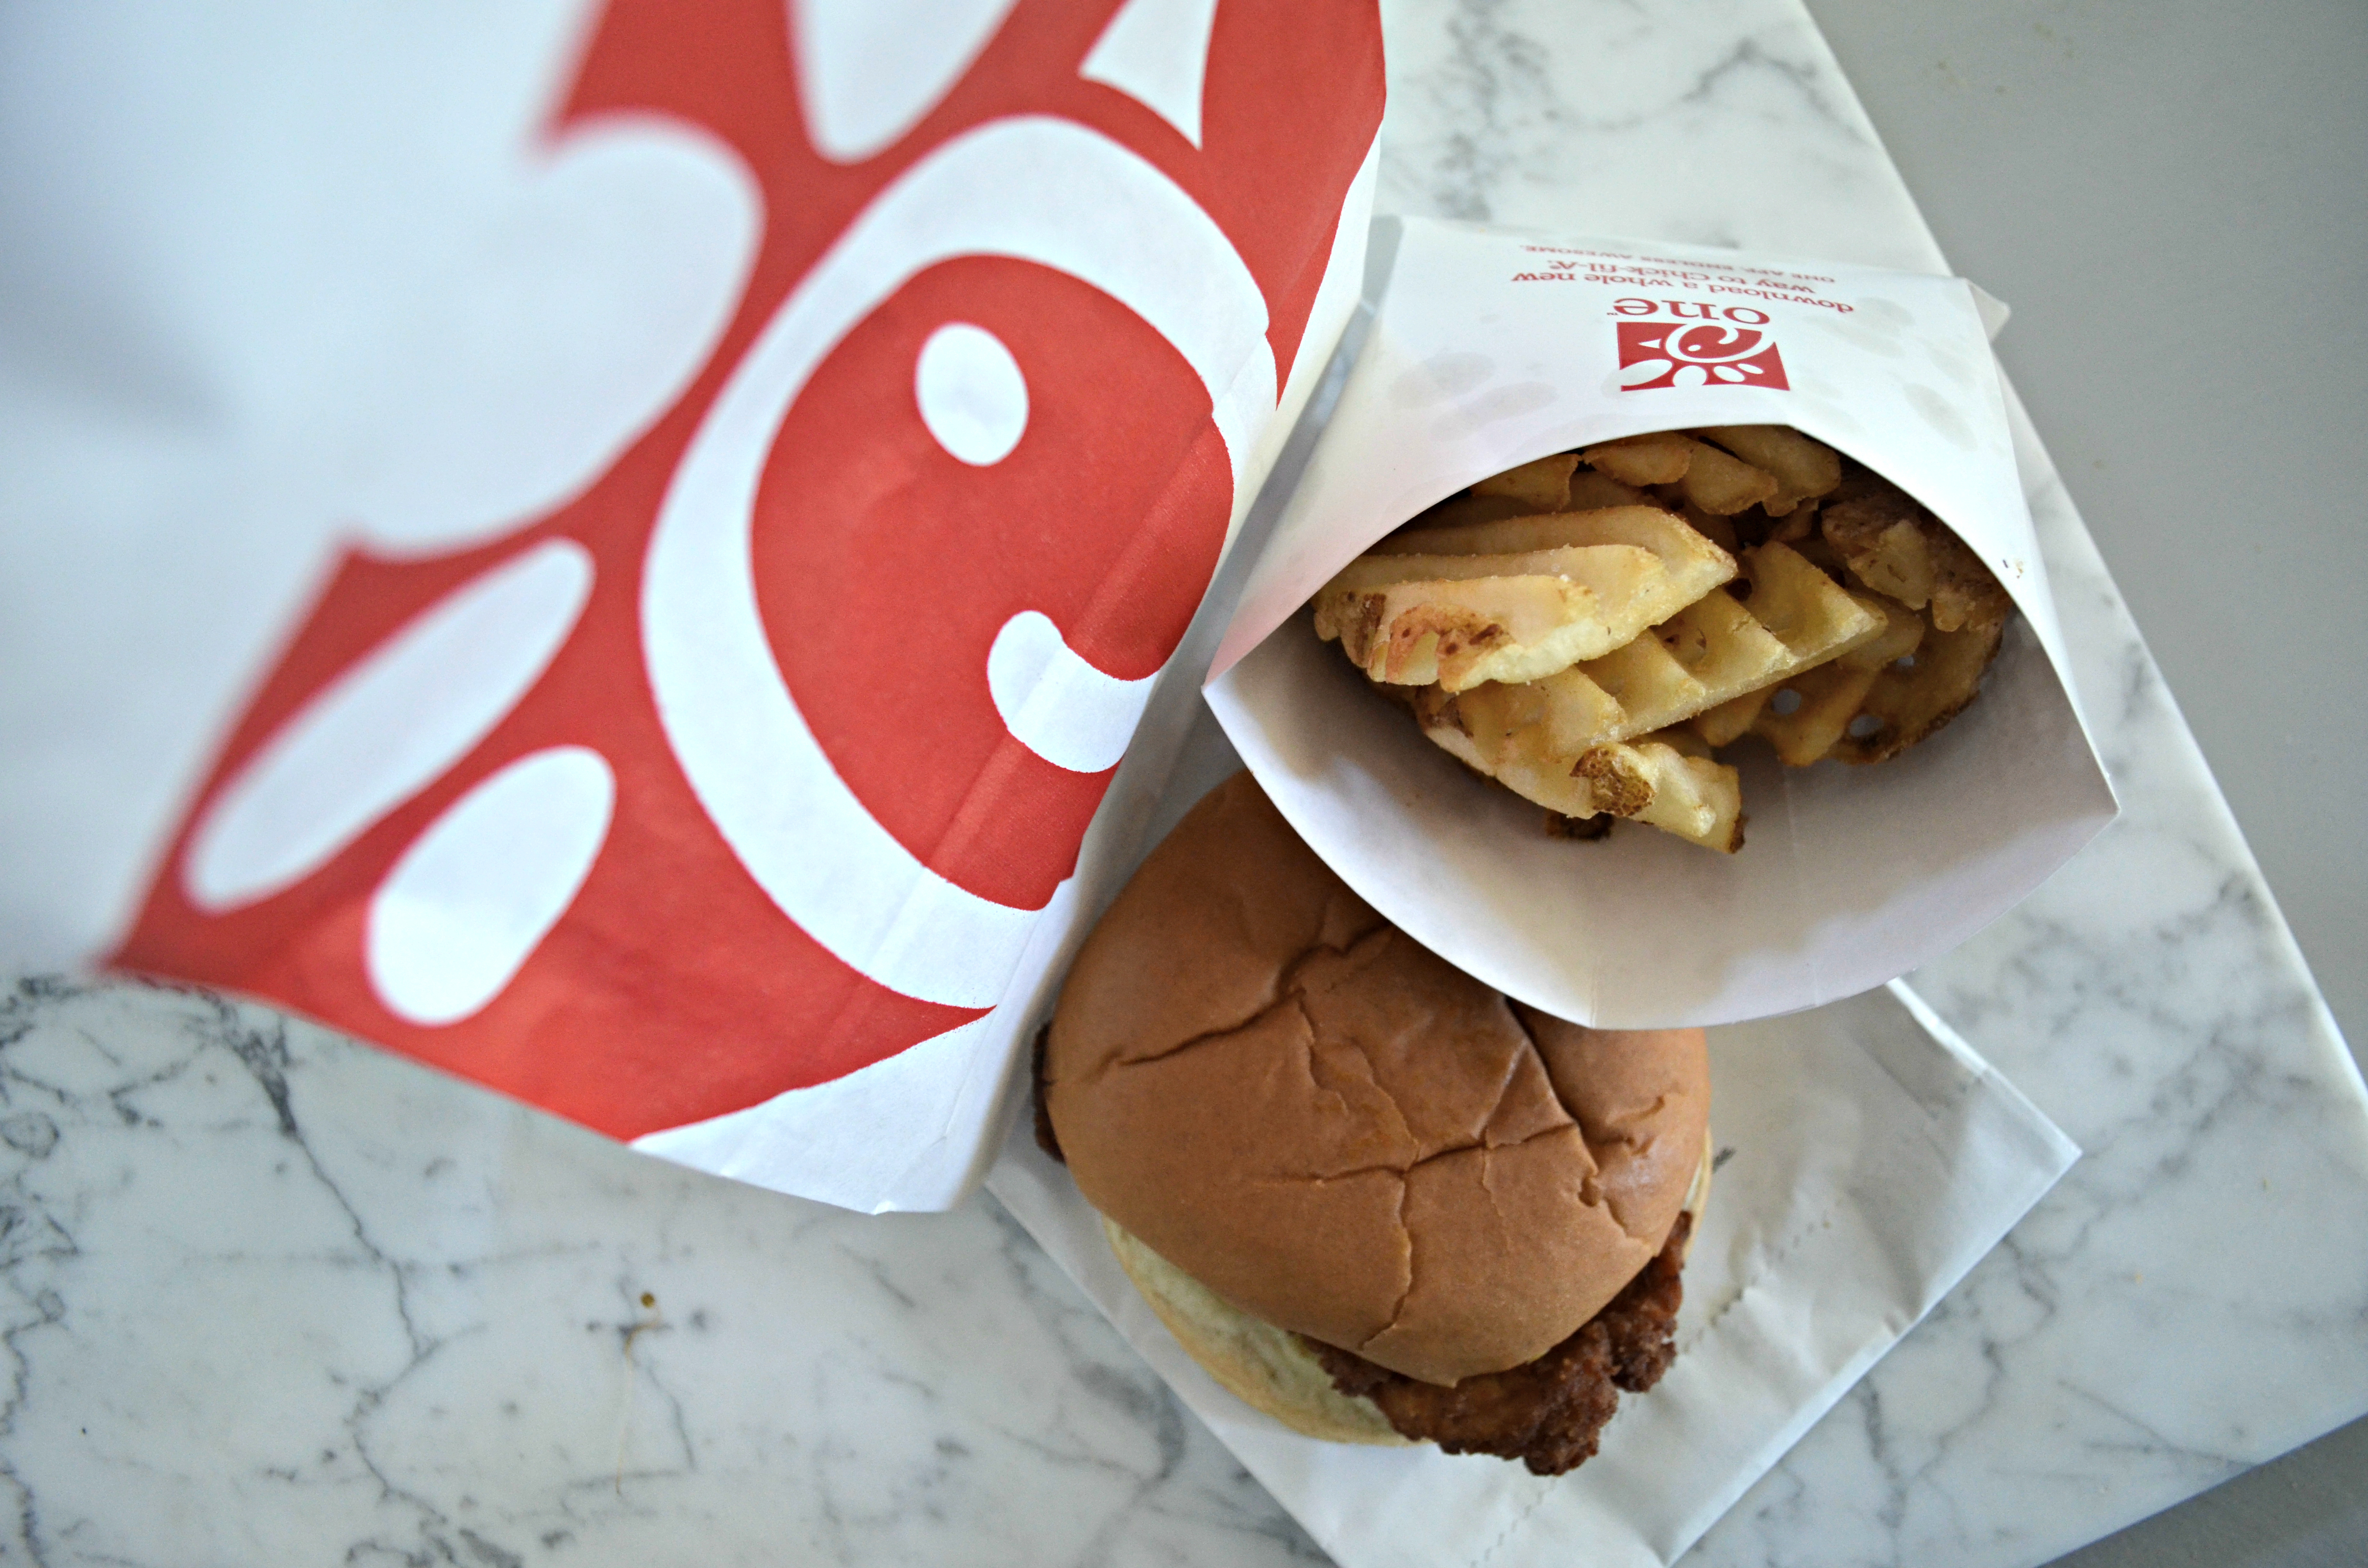 Get Chick-fil-A free nuggets through the app - A Chick-fil-A burger and fries